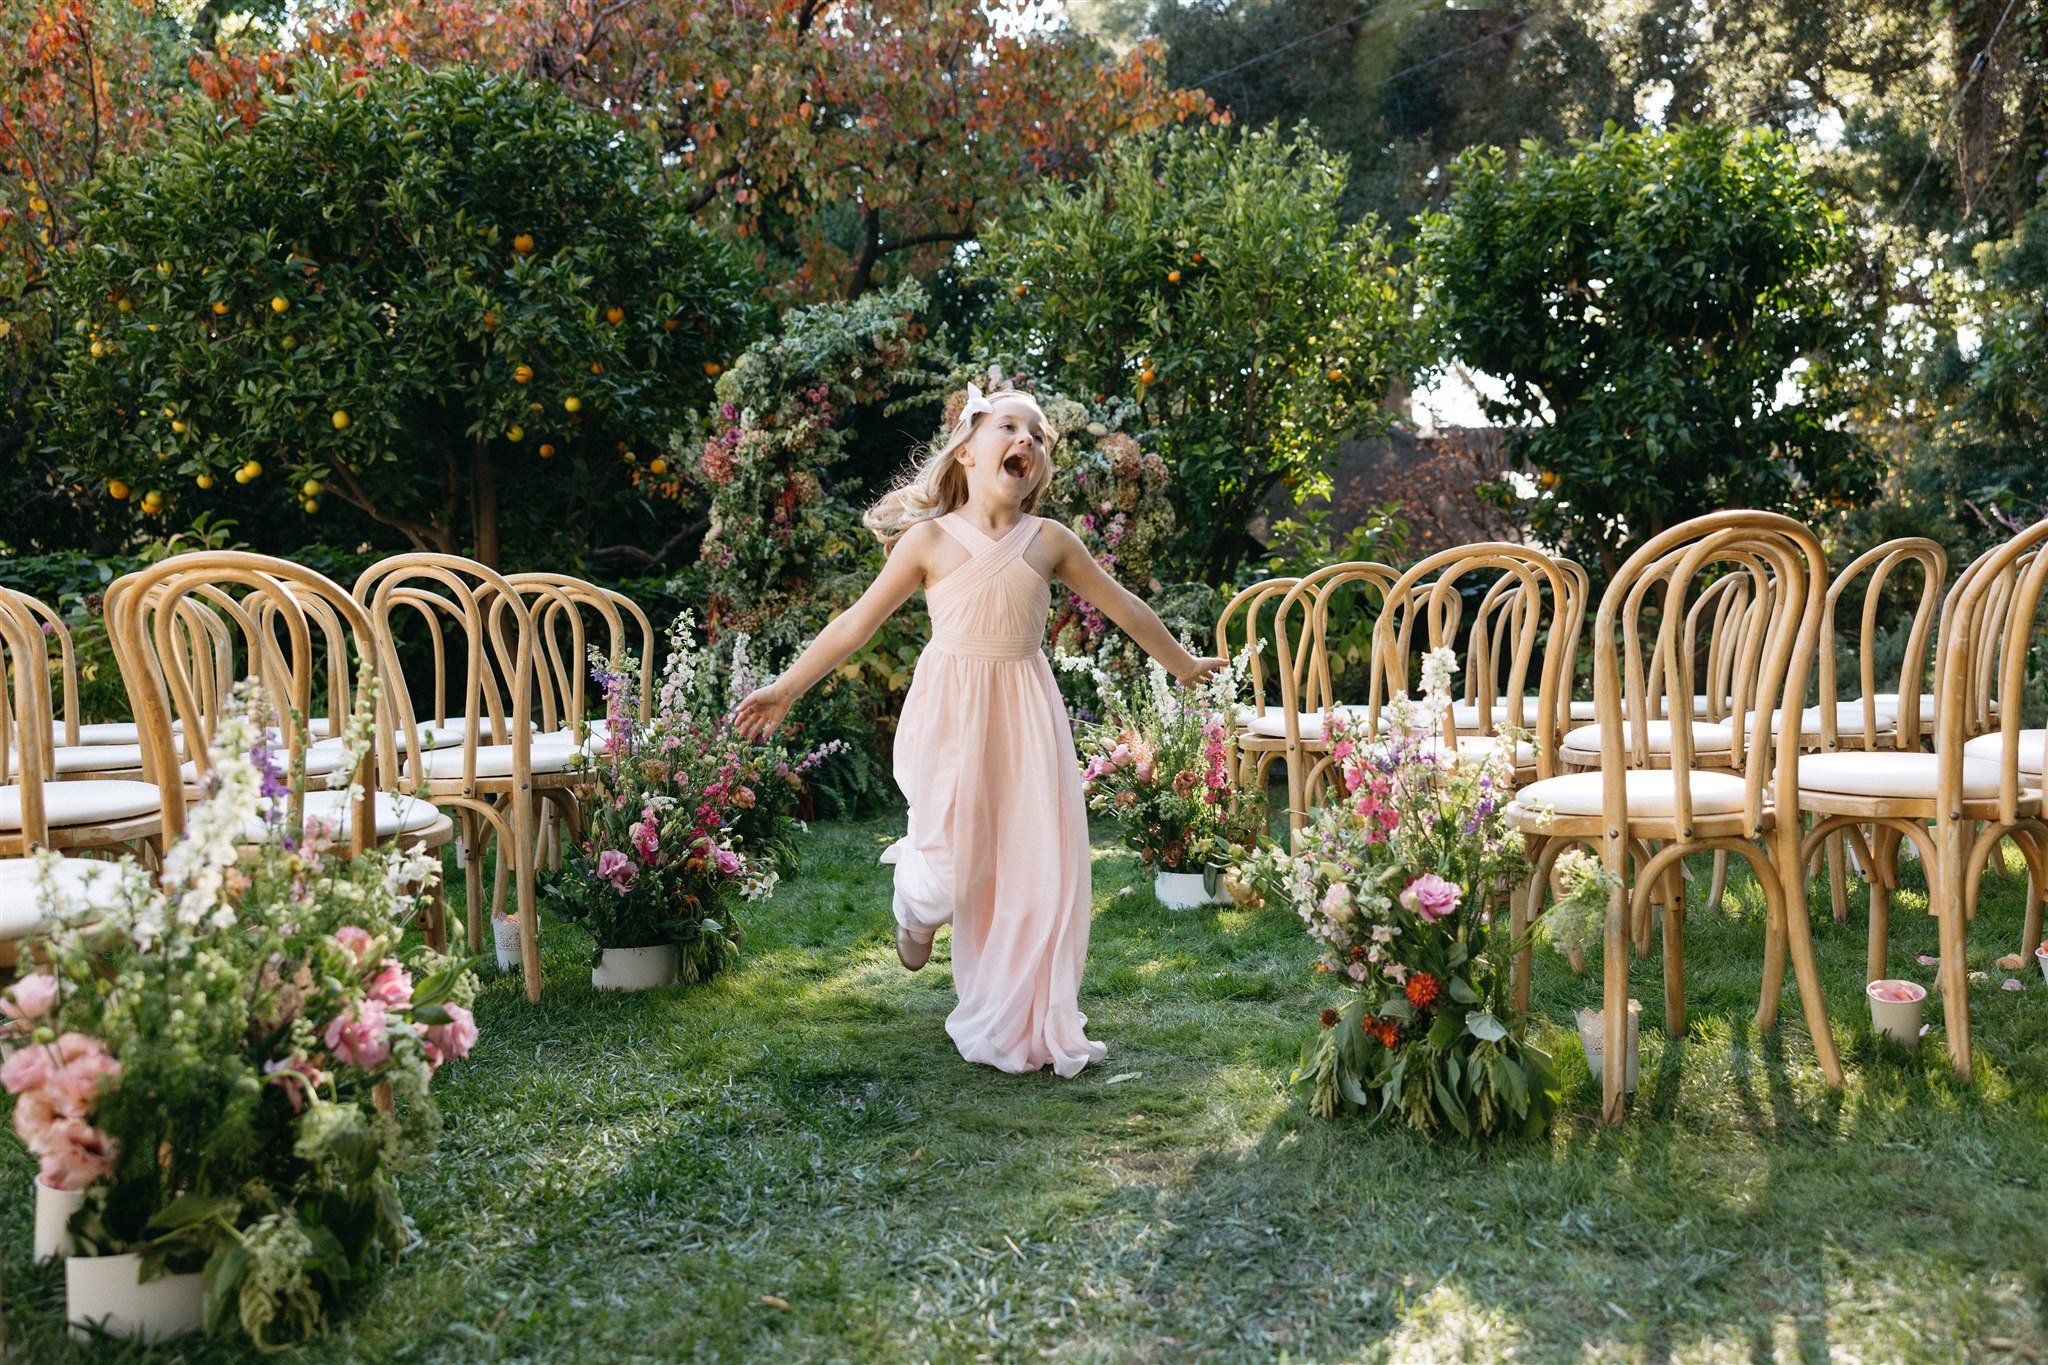 garden party style wedding ceremony complete with wildflowers everywhere